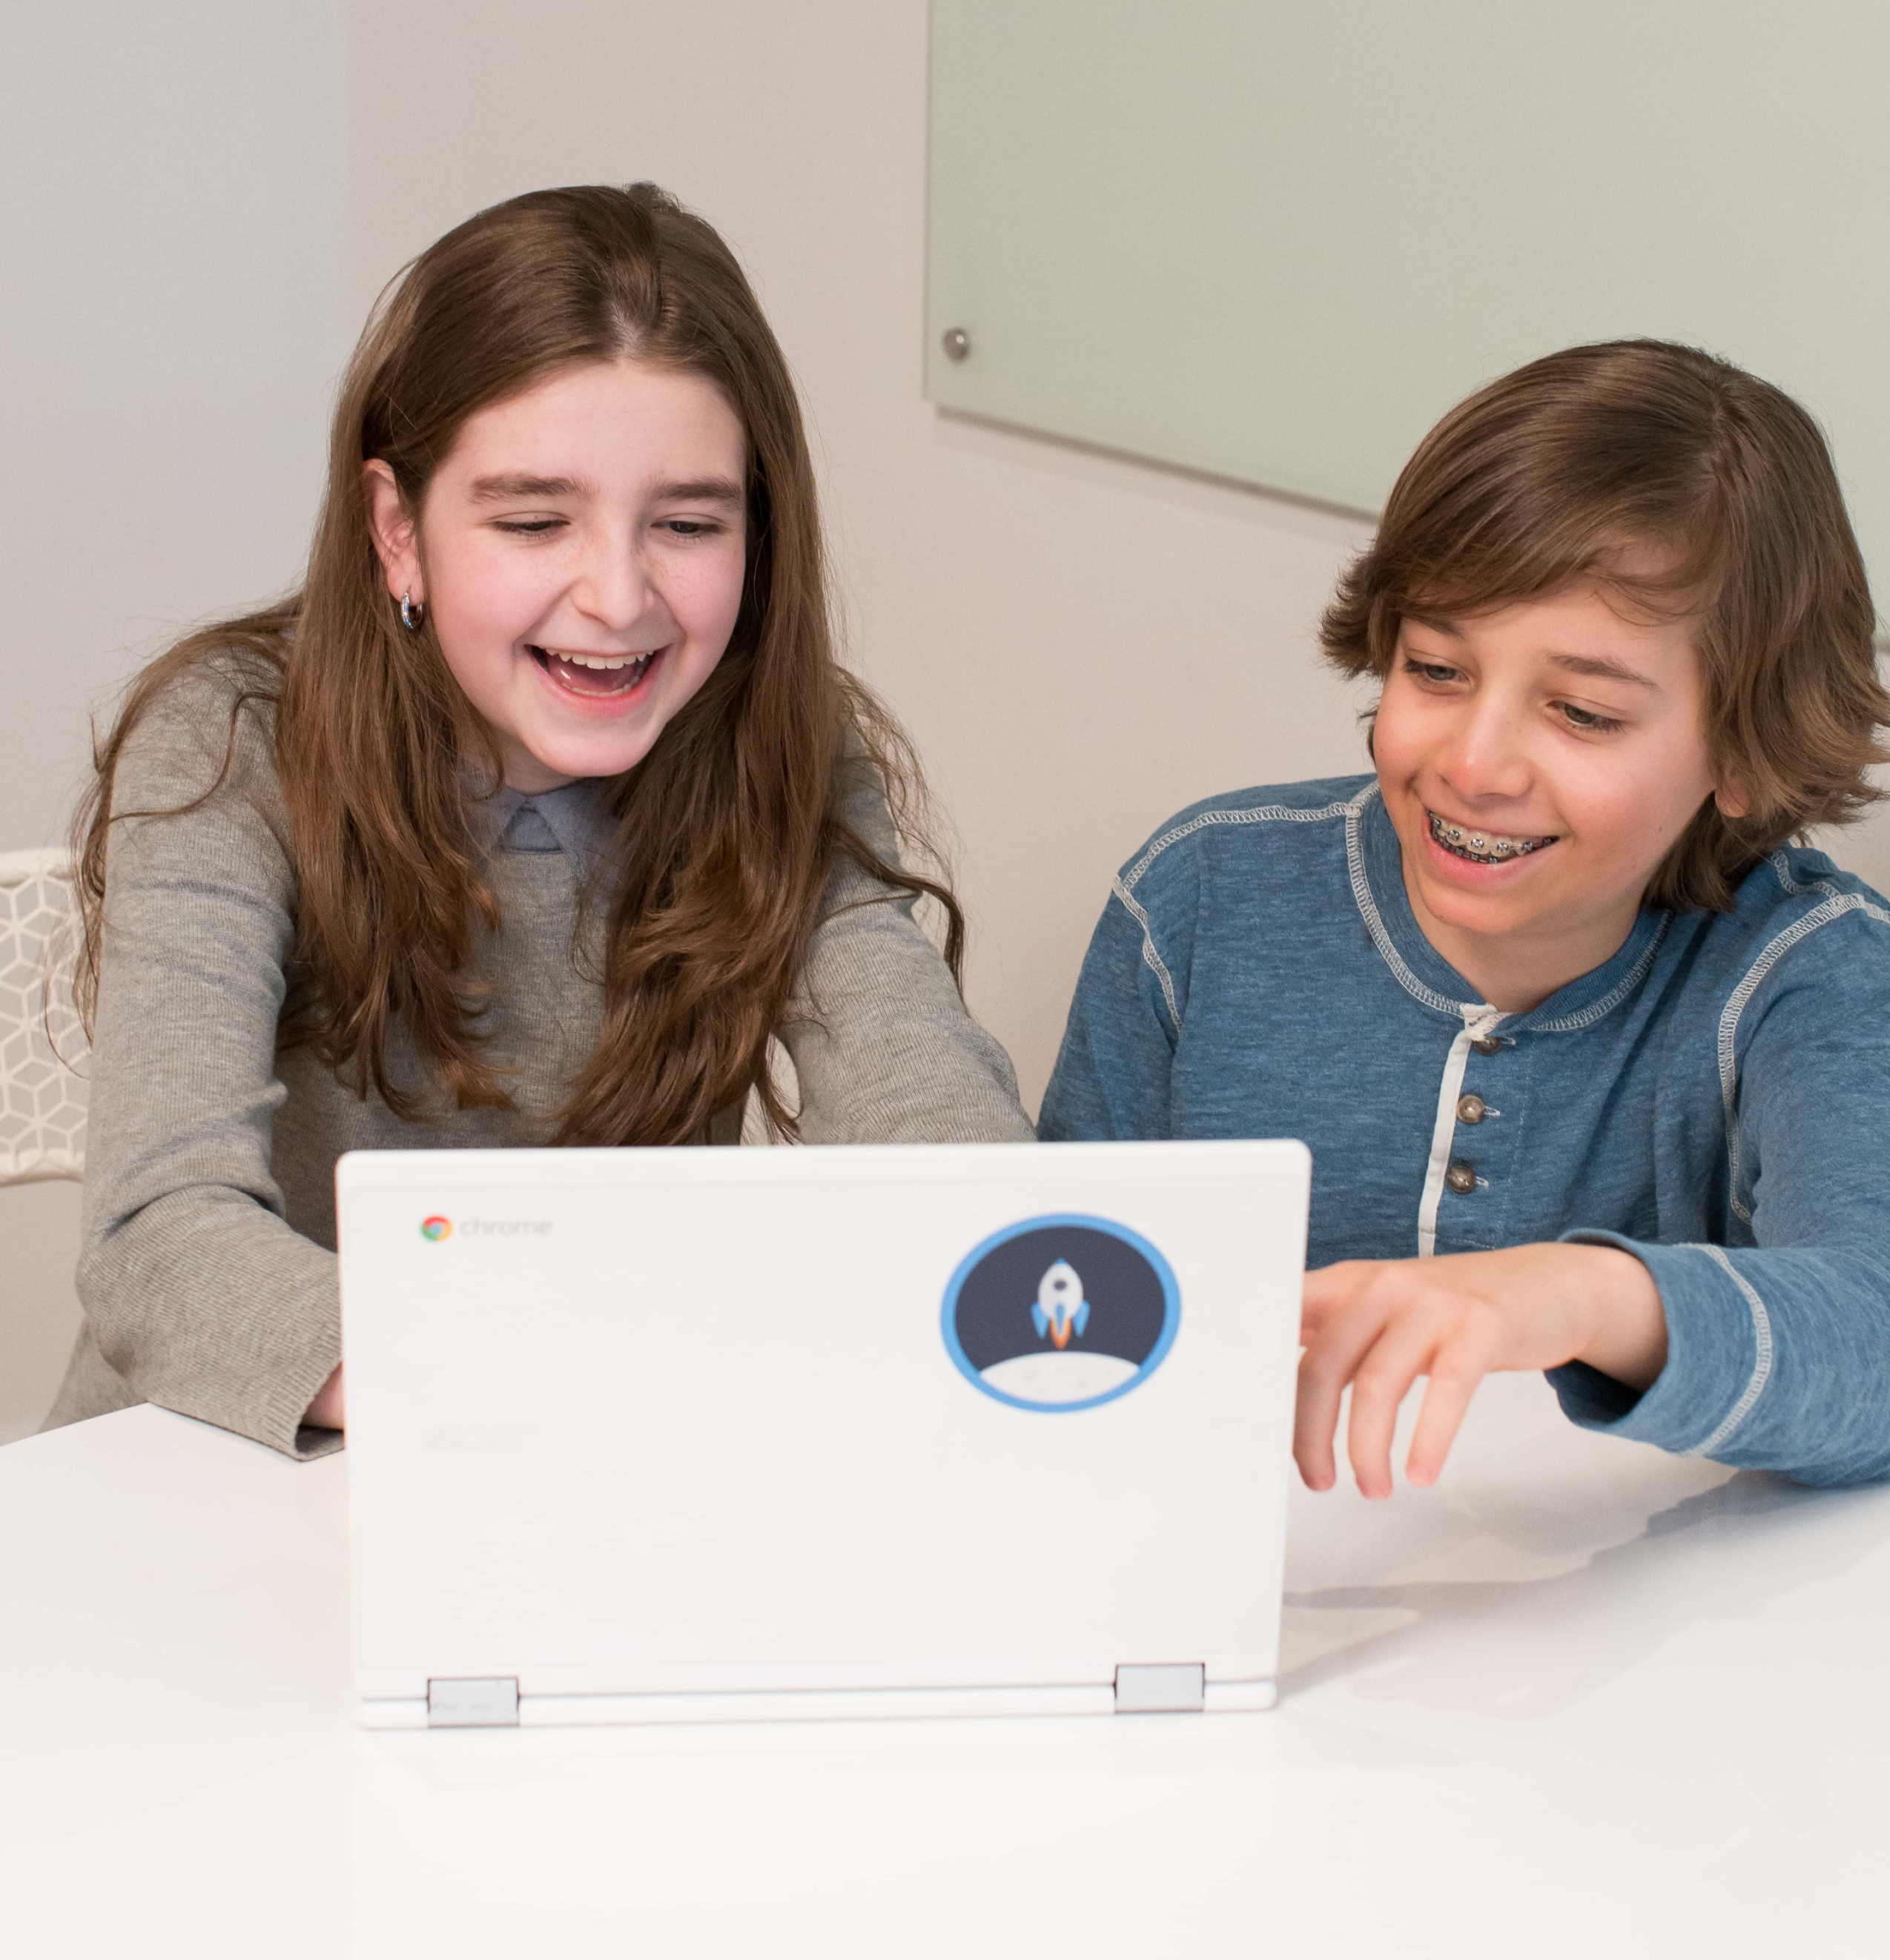 Kids coding on a computer